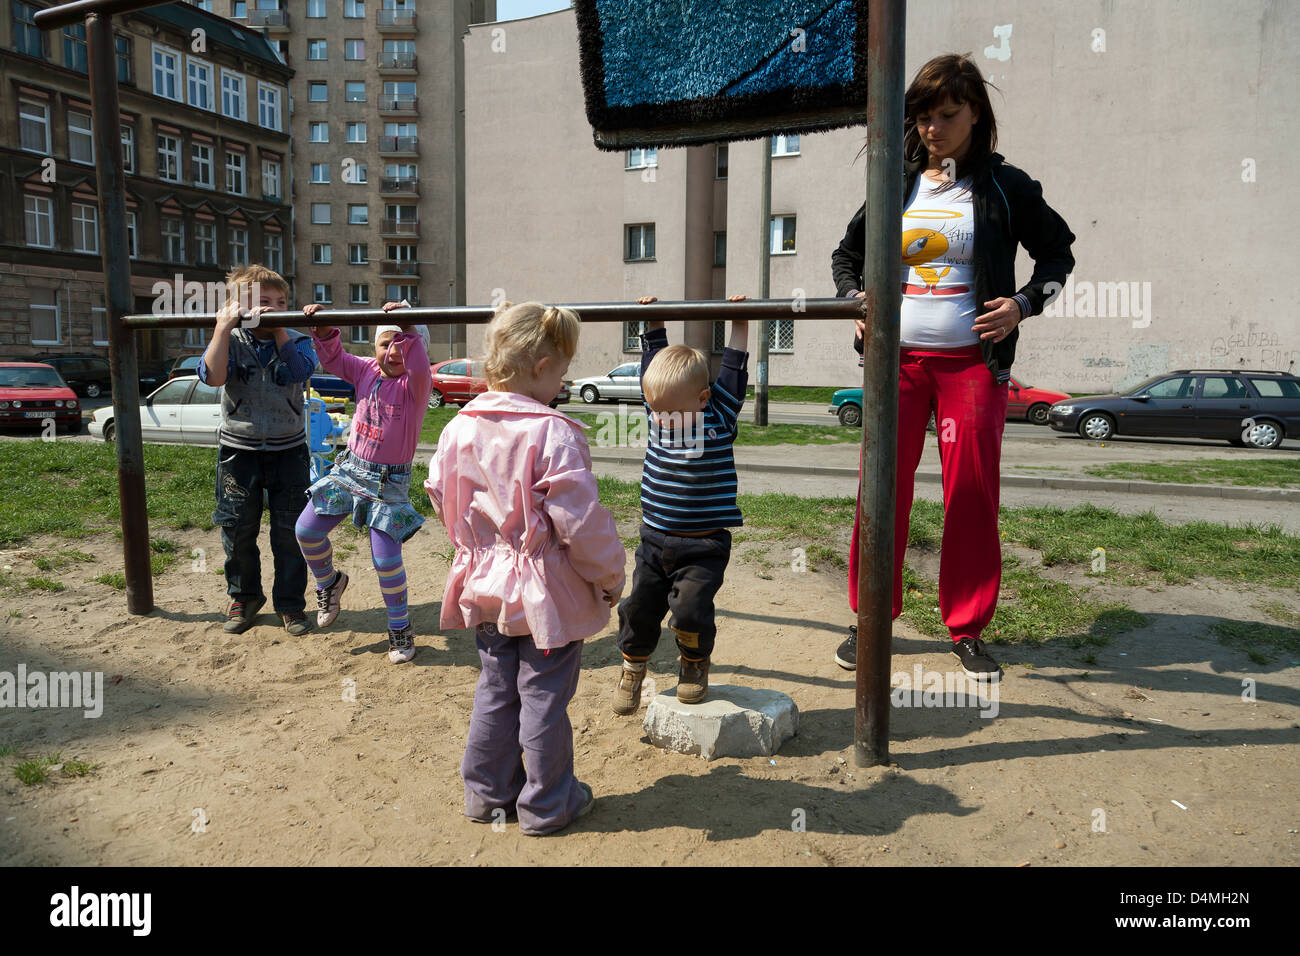 Gdansk, Poland, mother and children at play Stock Photo - Alamy